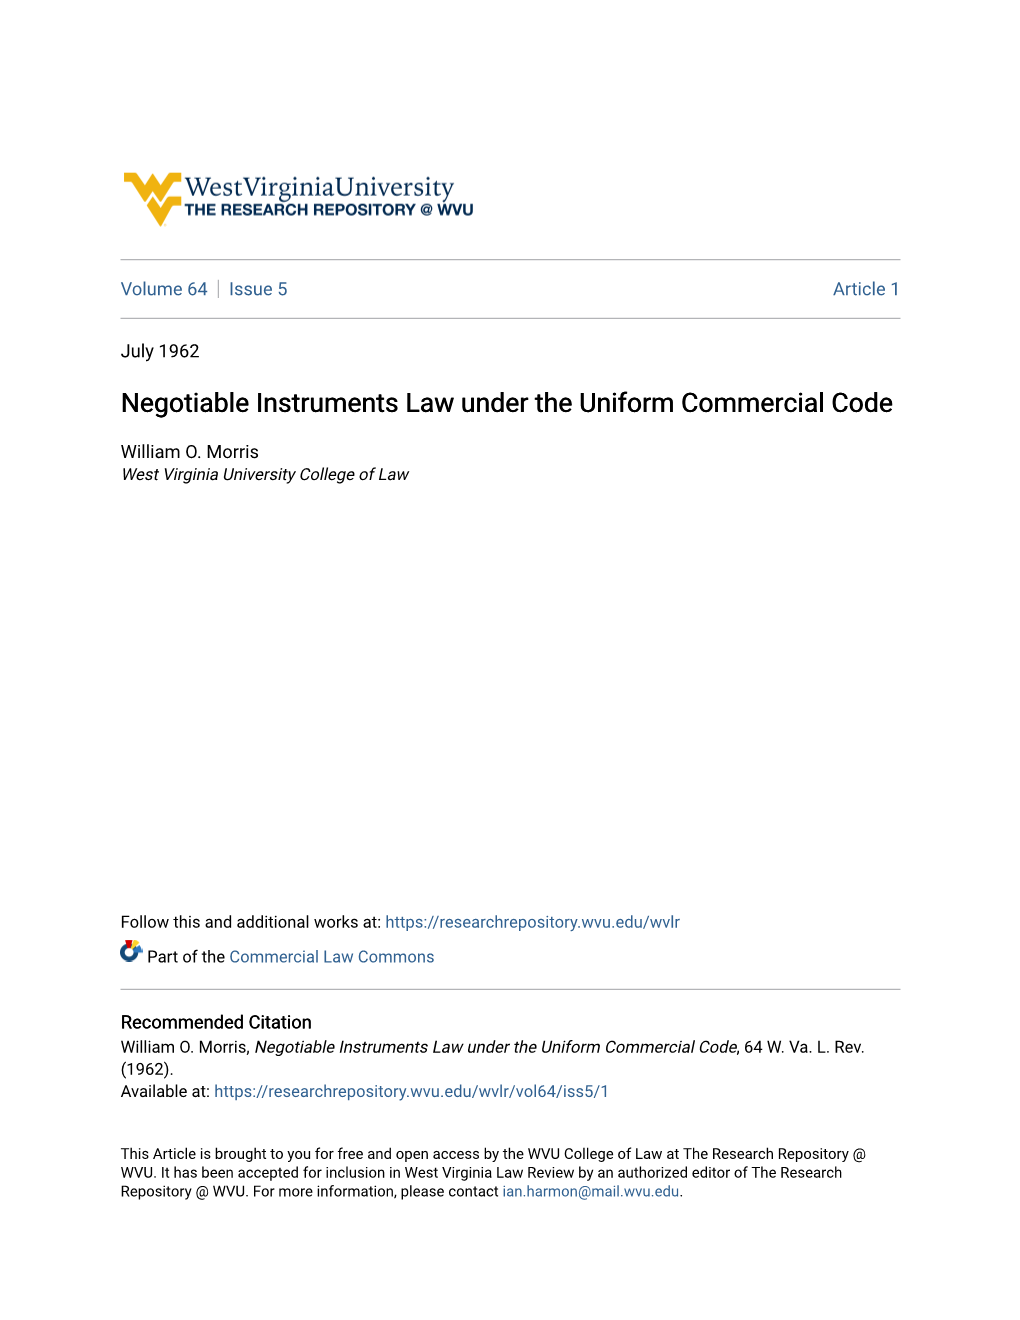 Negotiable Instruments Law Under the Uniform Commercial Code